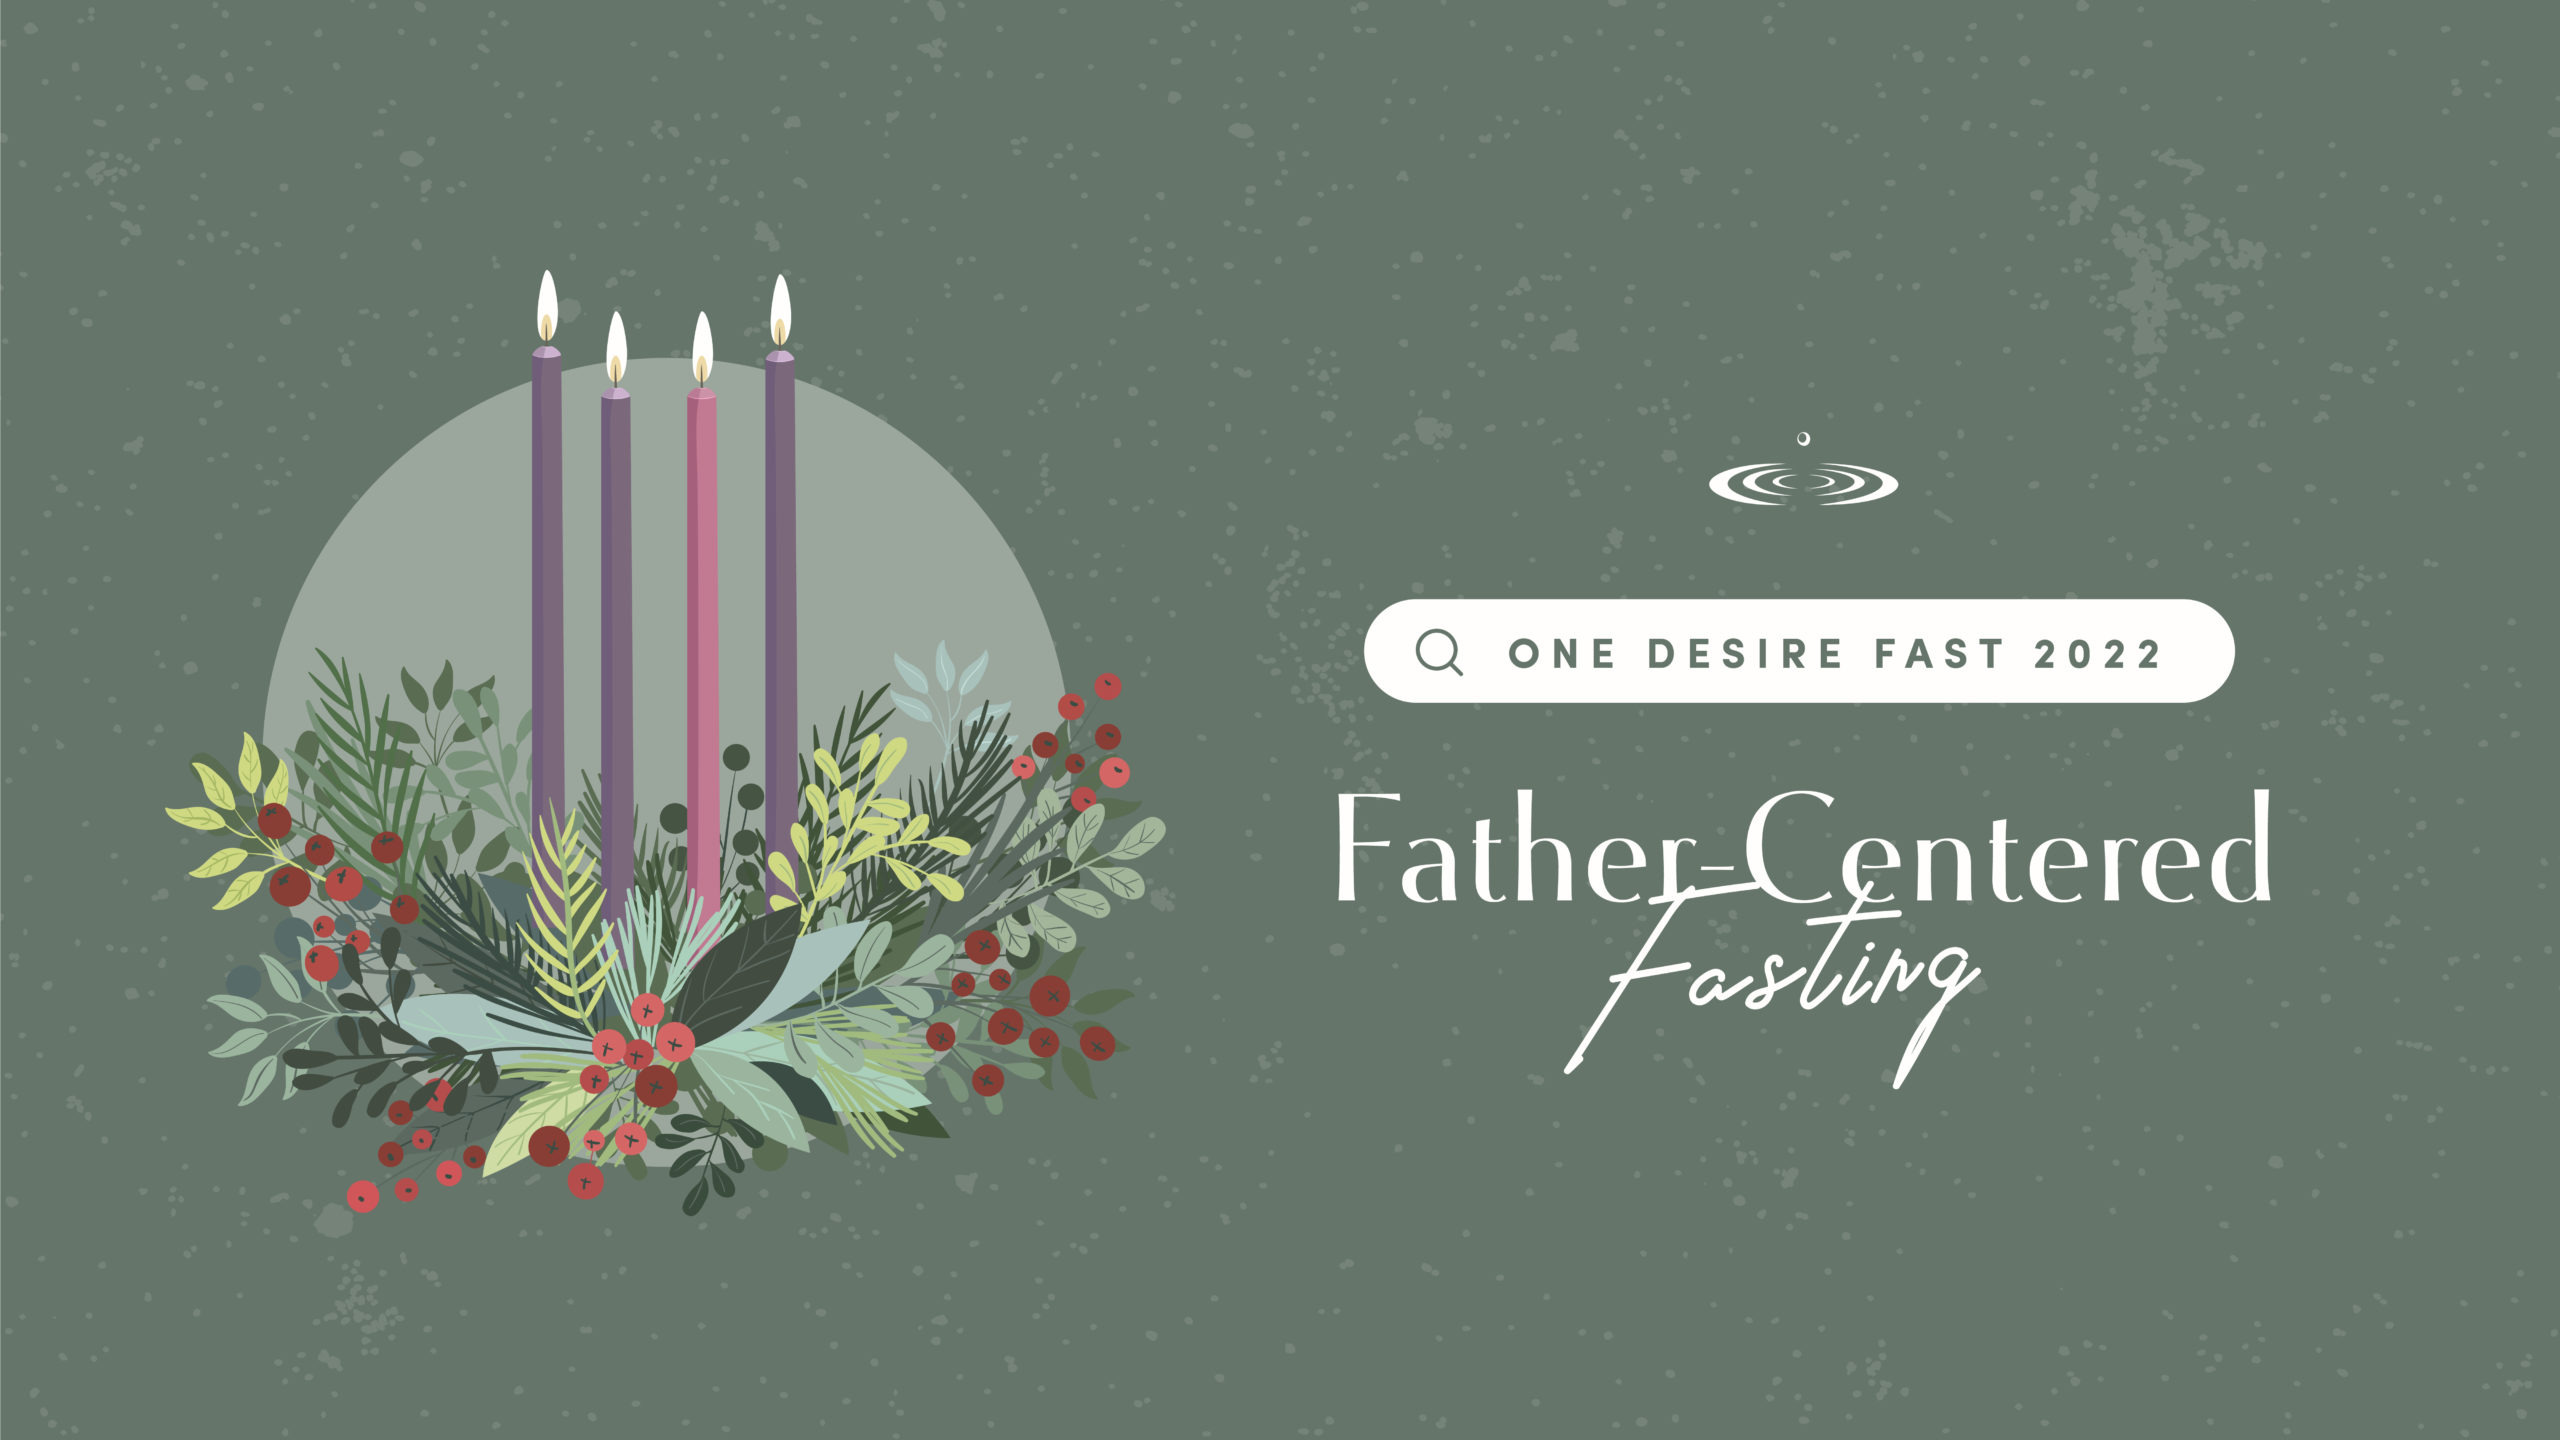 One Desire Fast 2022: Father-Centered Fasting